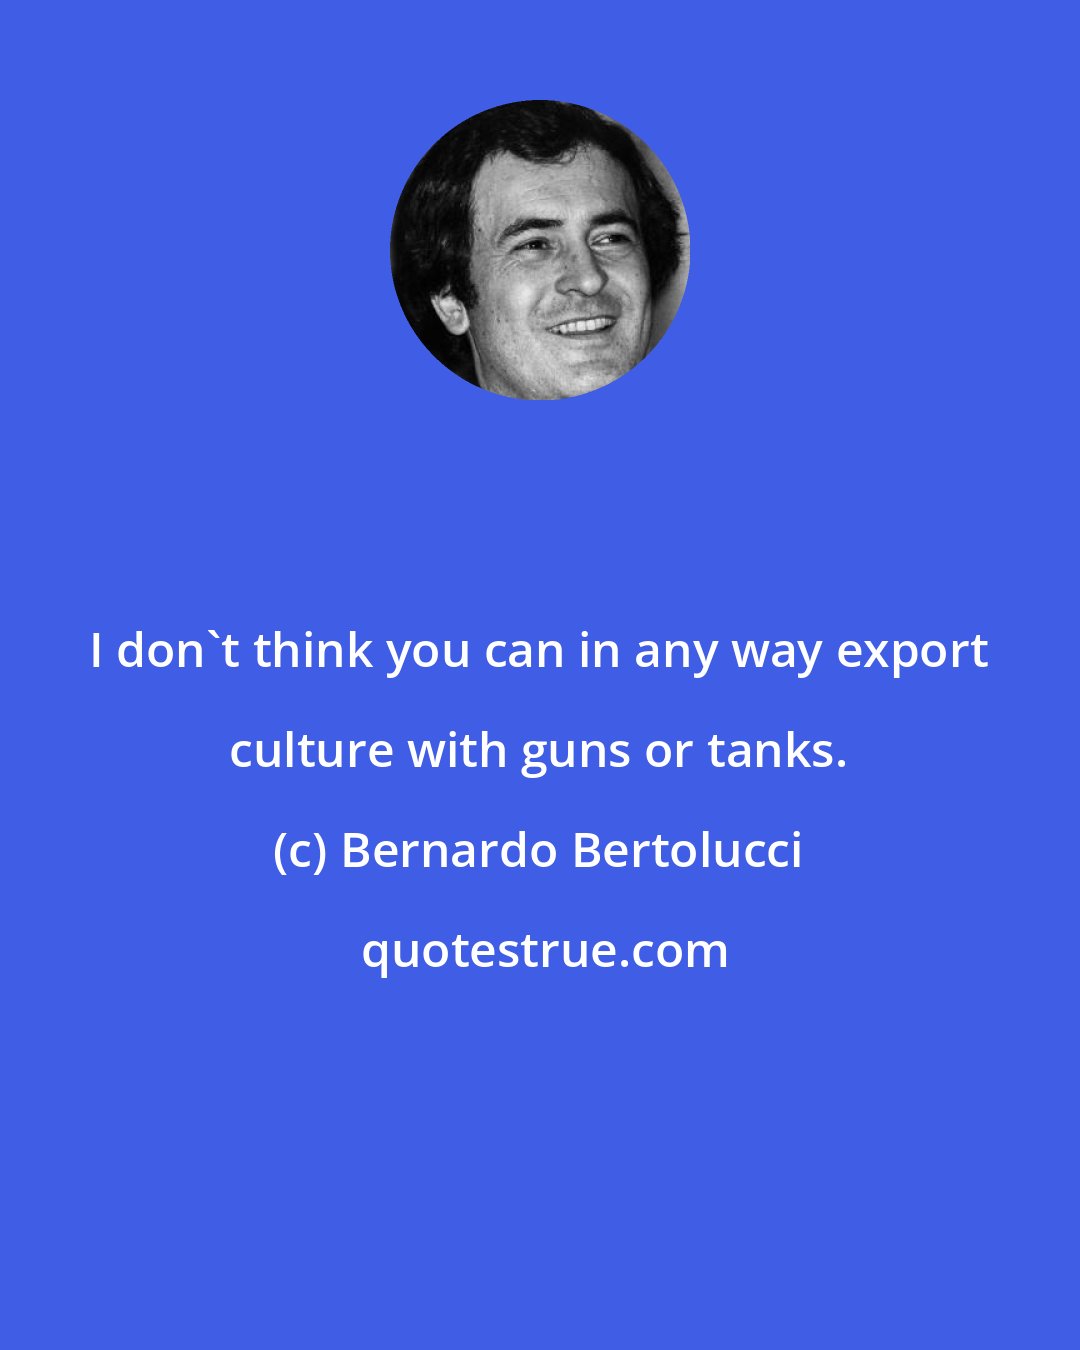 Bernardo Bertolucci: I don't think you can in any way export culture with guns or tanks.